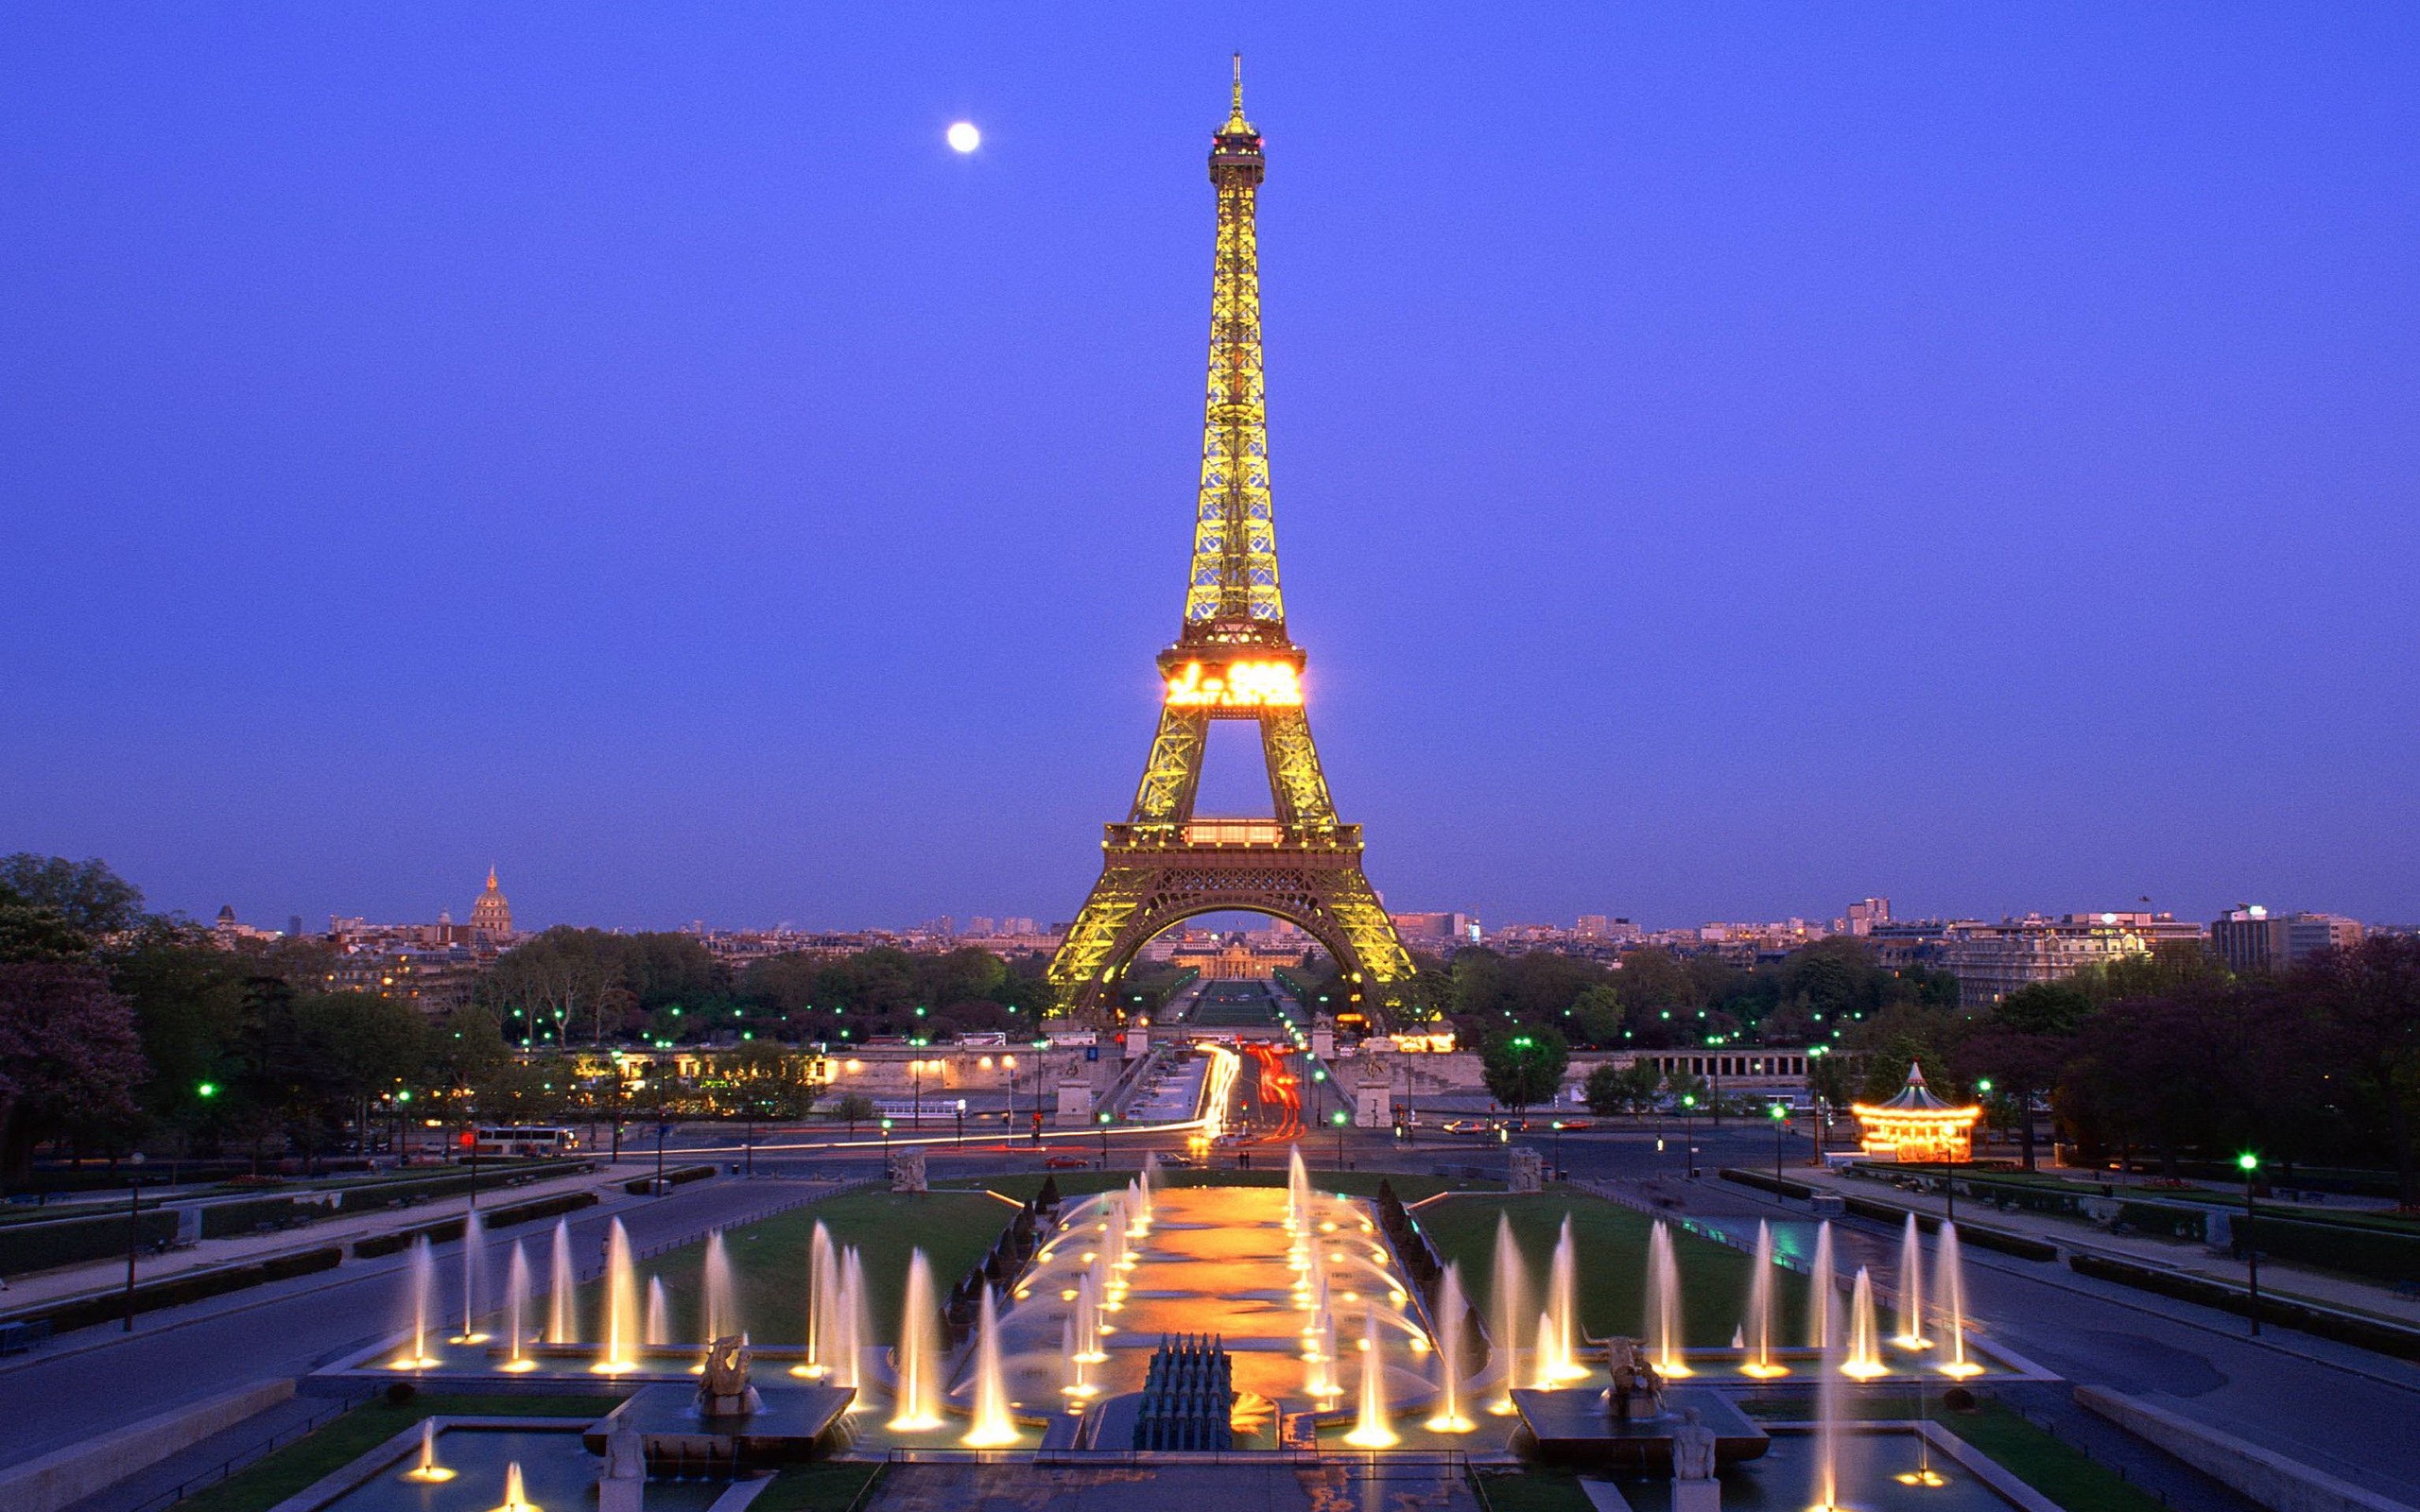 21 Must See Travel Photos of Romantic Paris World inside pictures